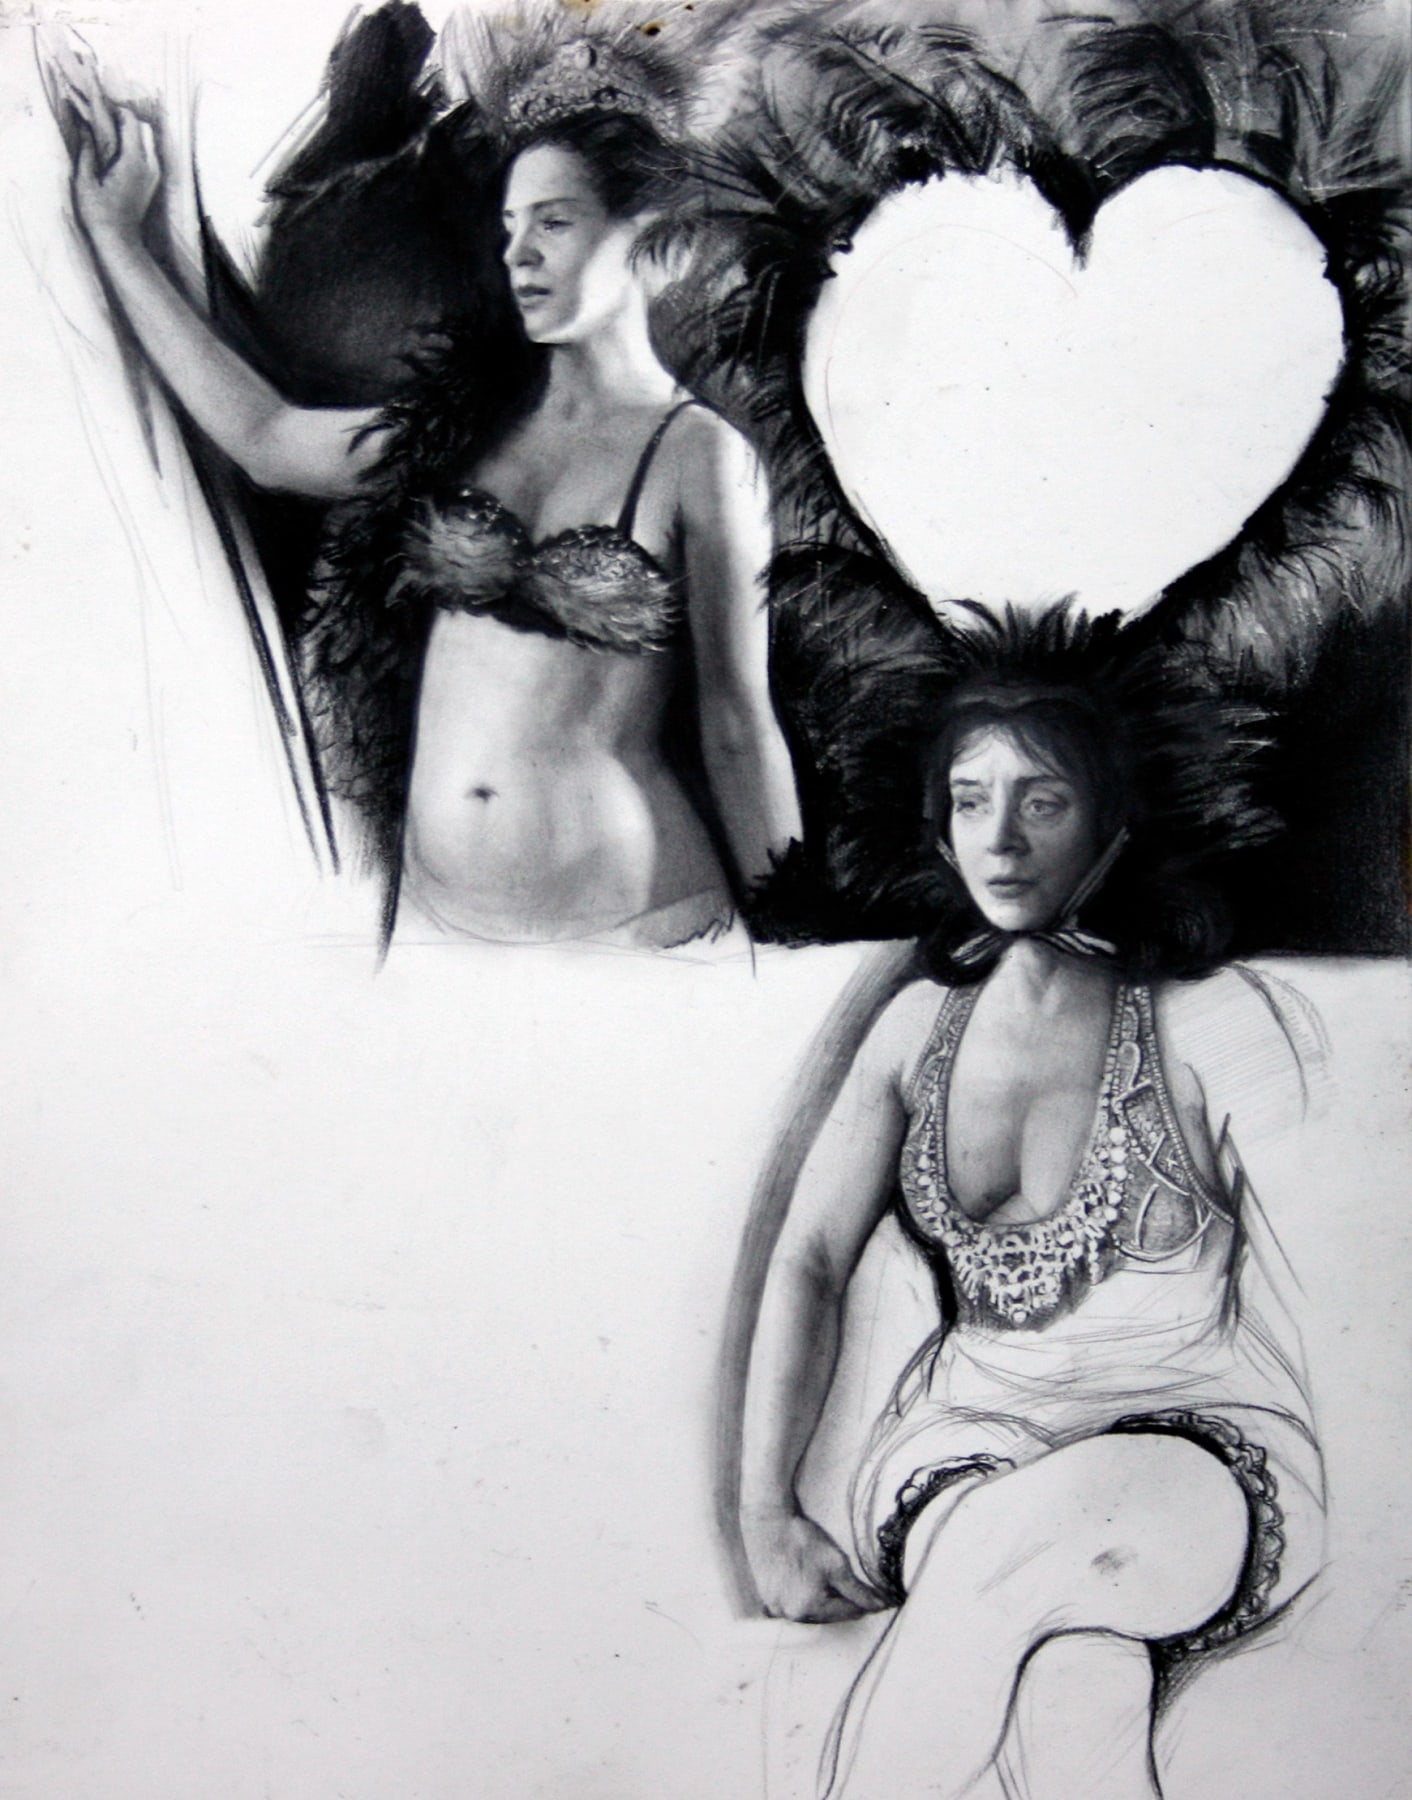 Steven Assael, Women with Feathers, 2008, crayon and graphite on paper, 14 x 11 inches